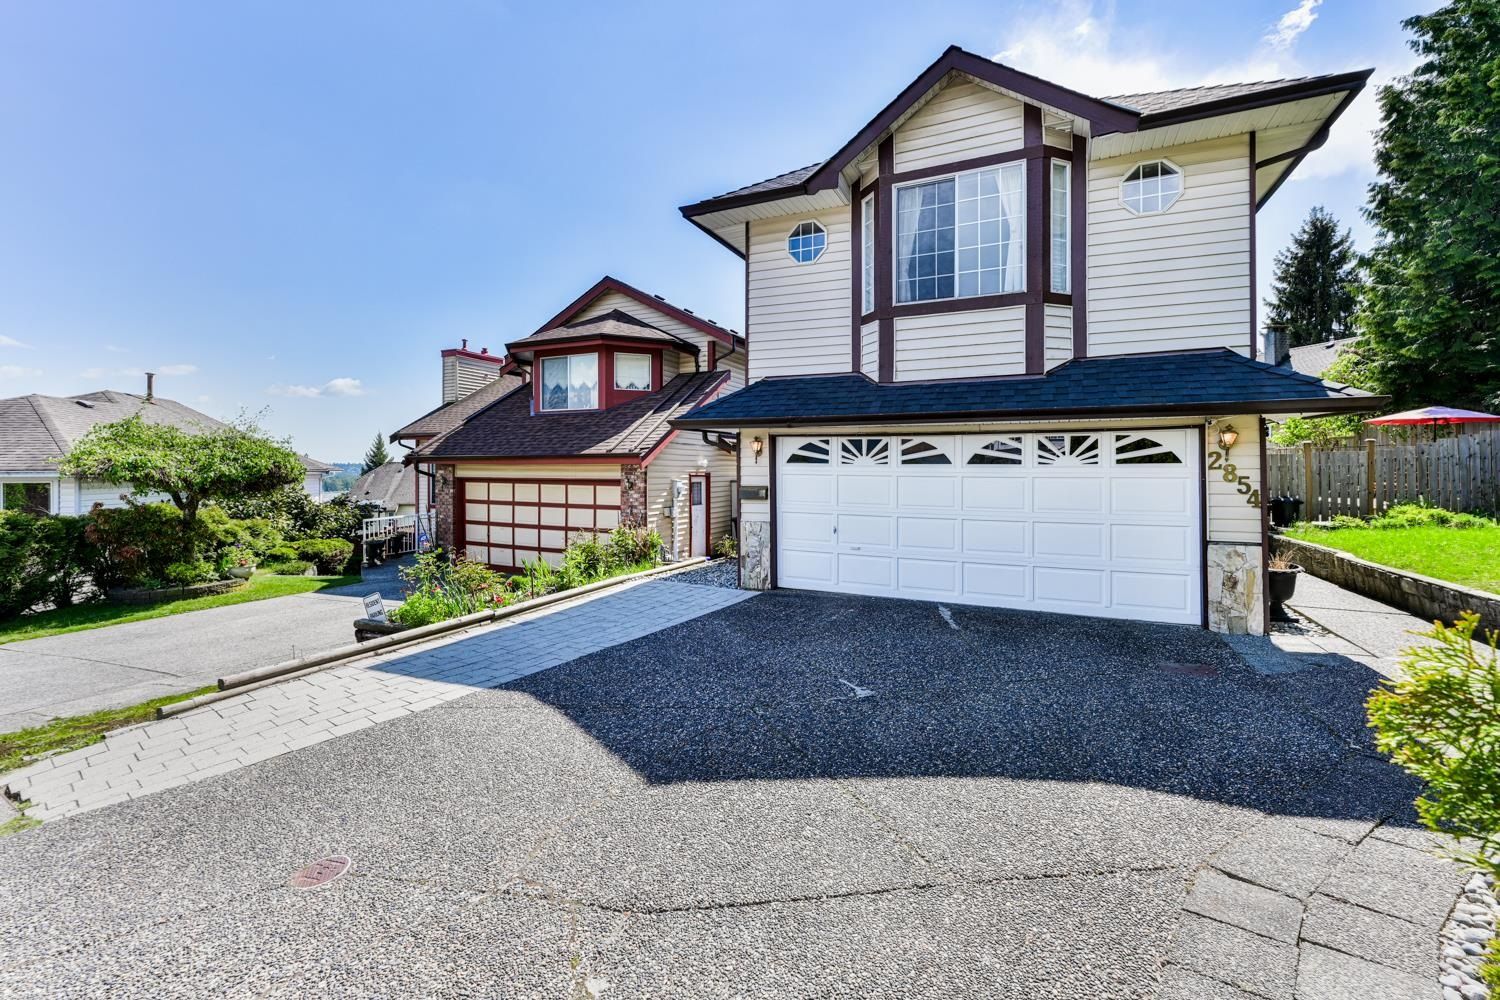 New property listed in Scott Creek, Coquitlam